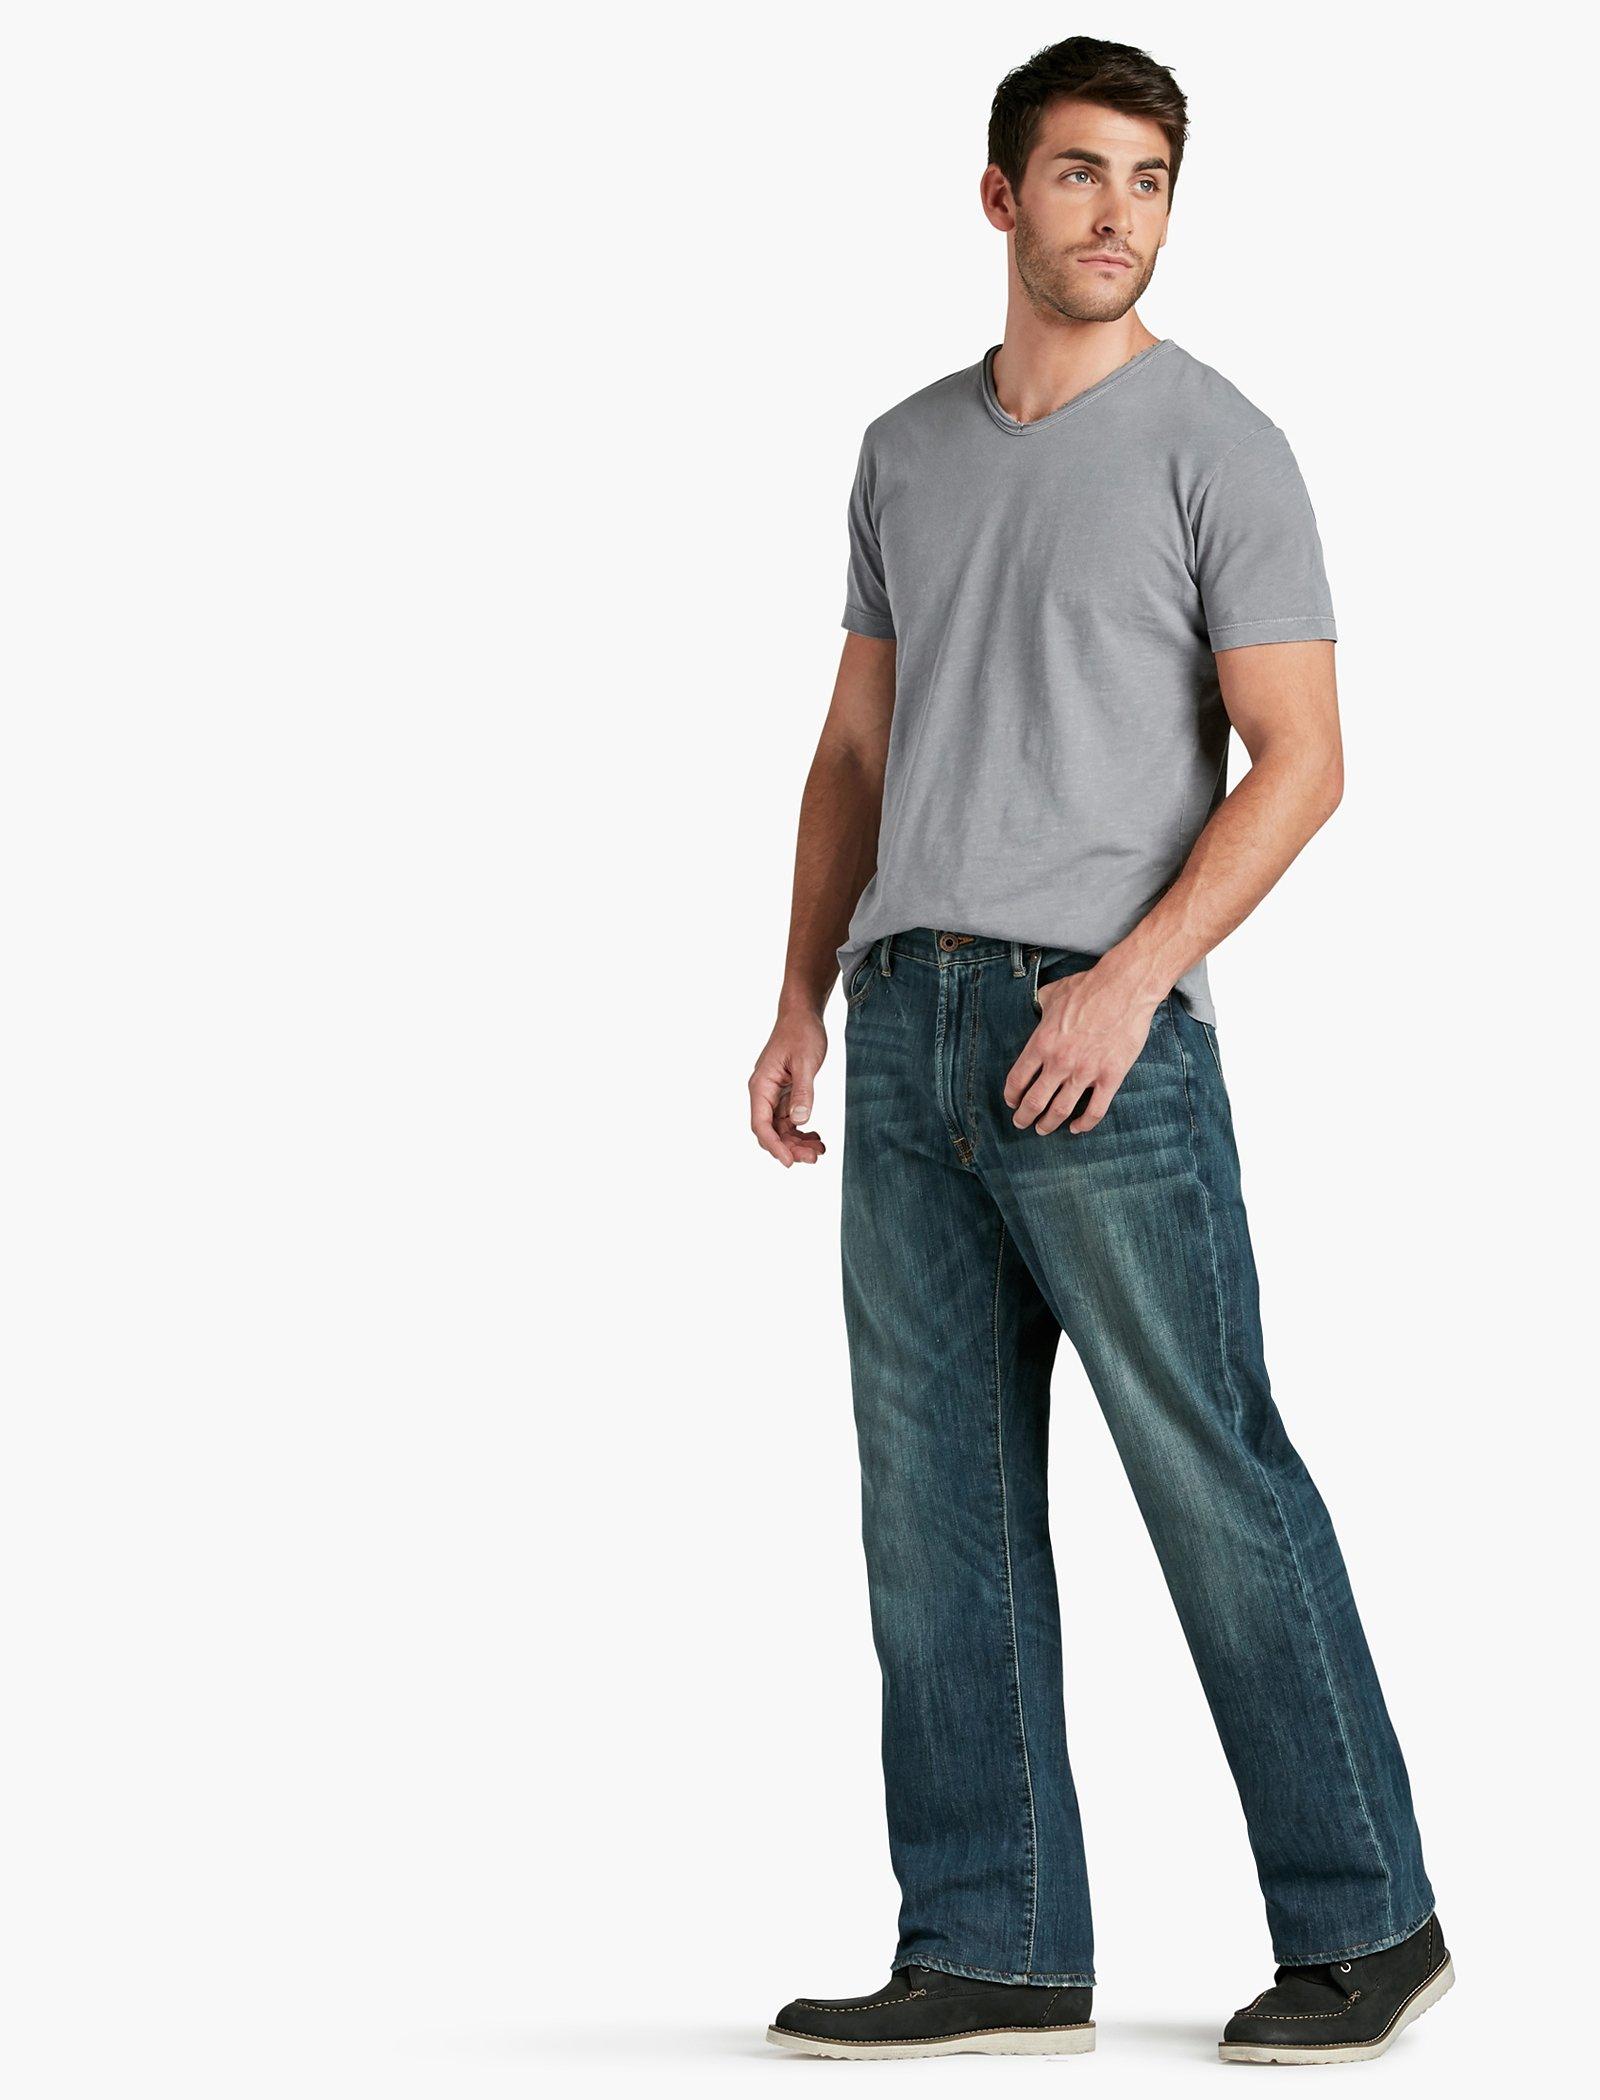 Best Deals for Mens Lucky Brand 181 Jeans